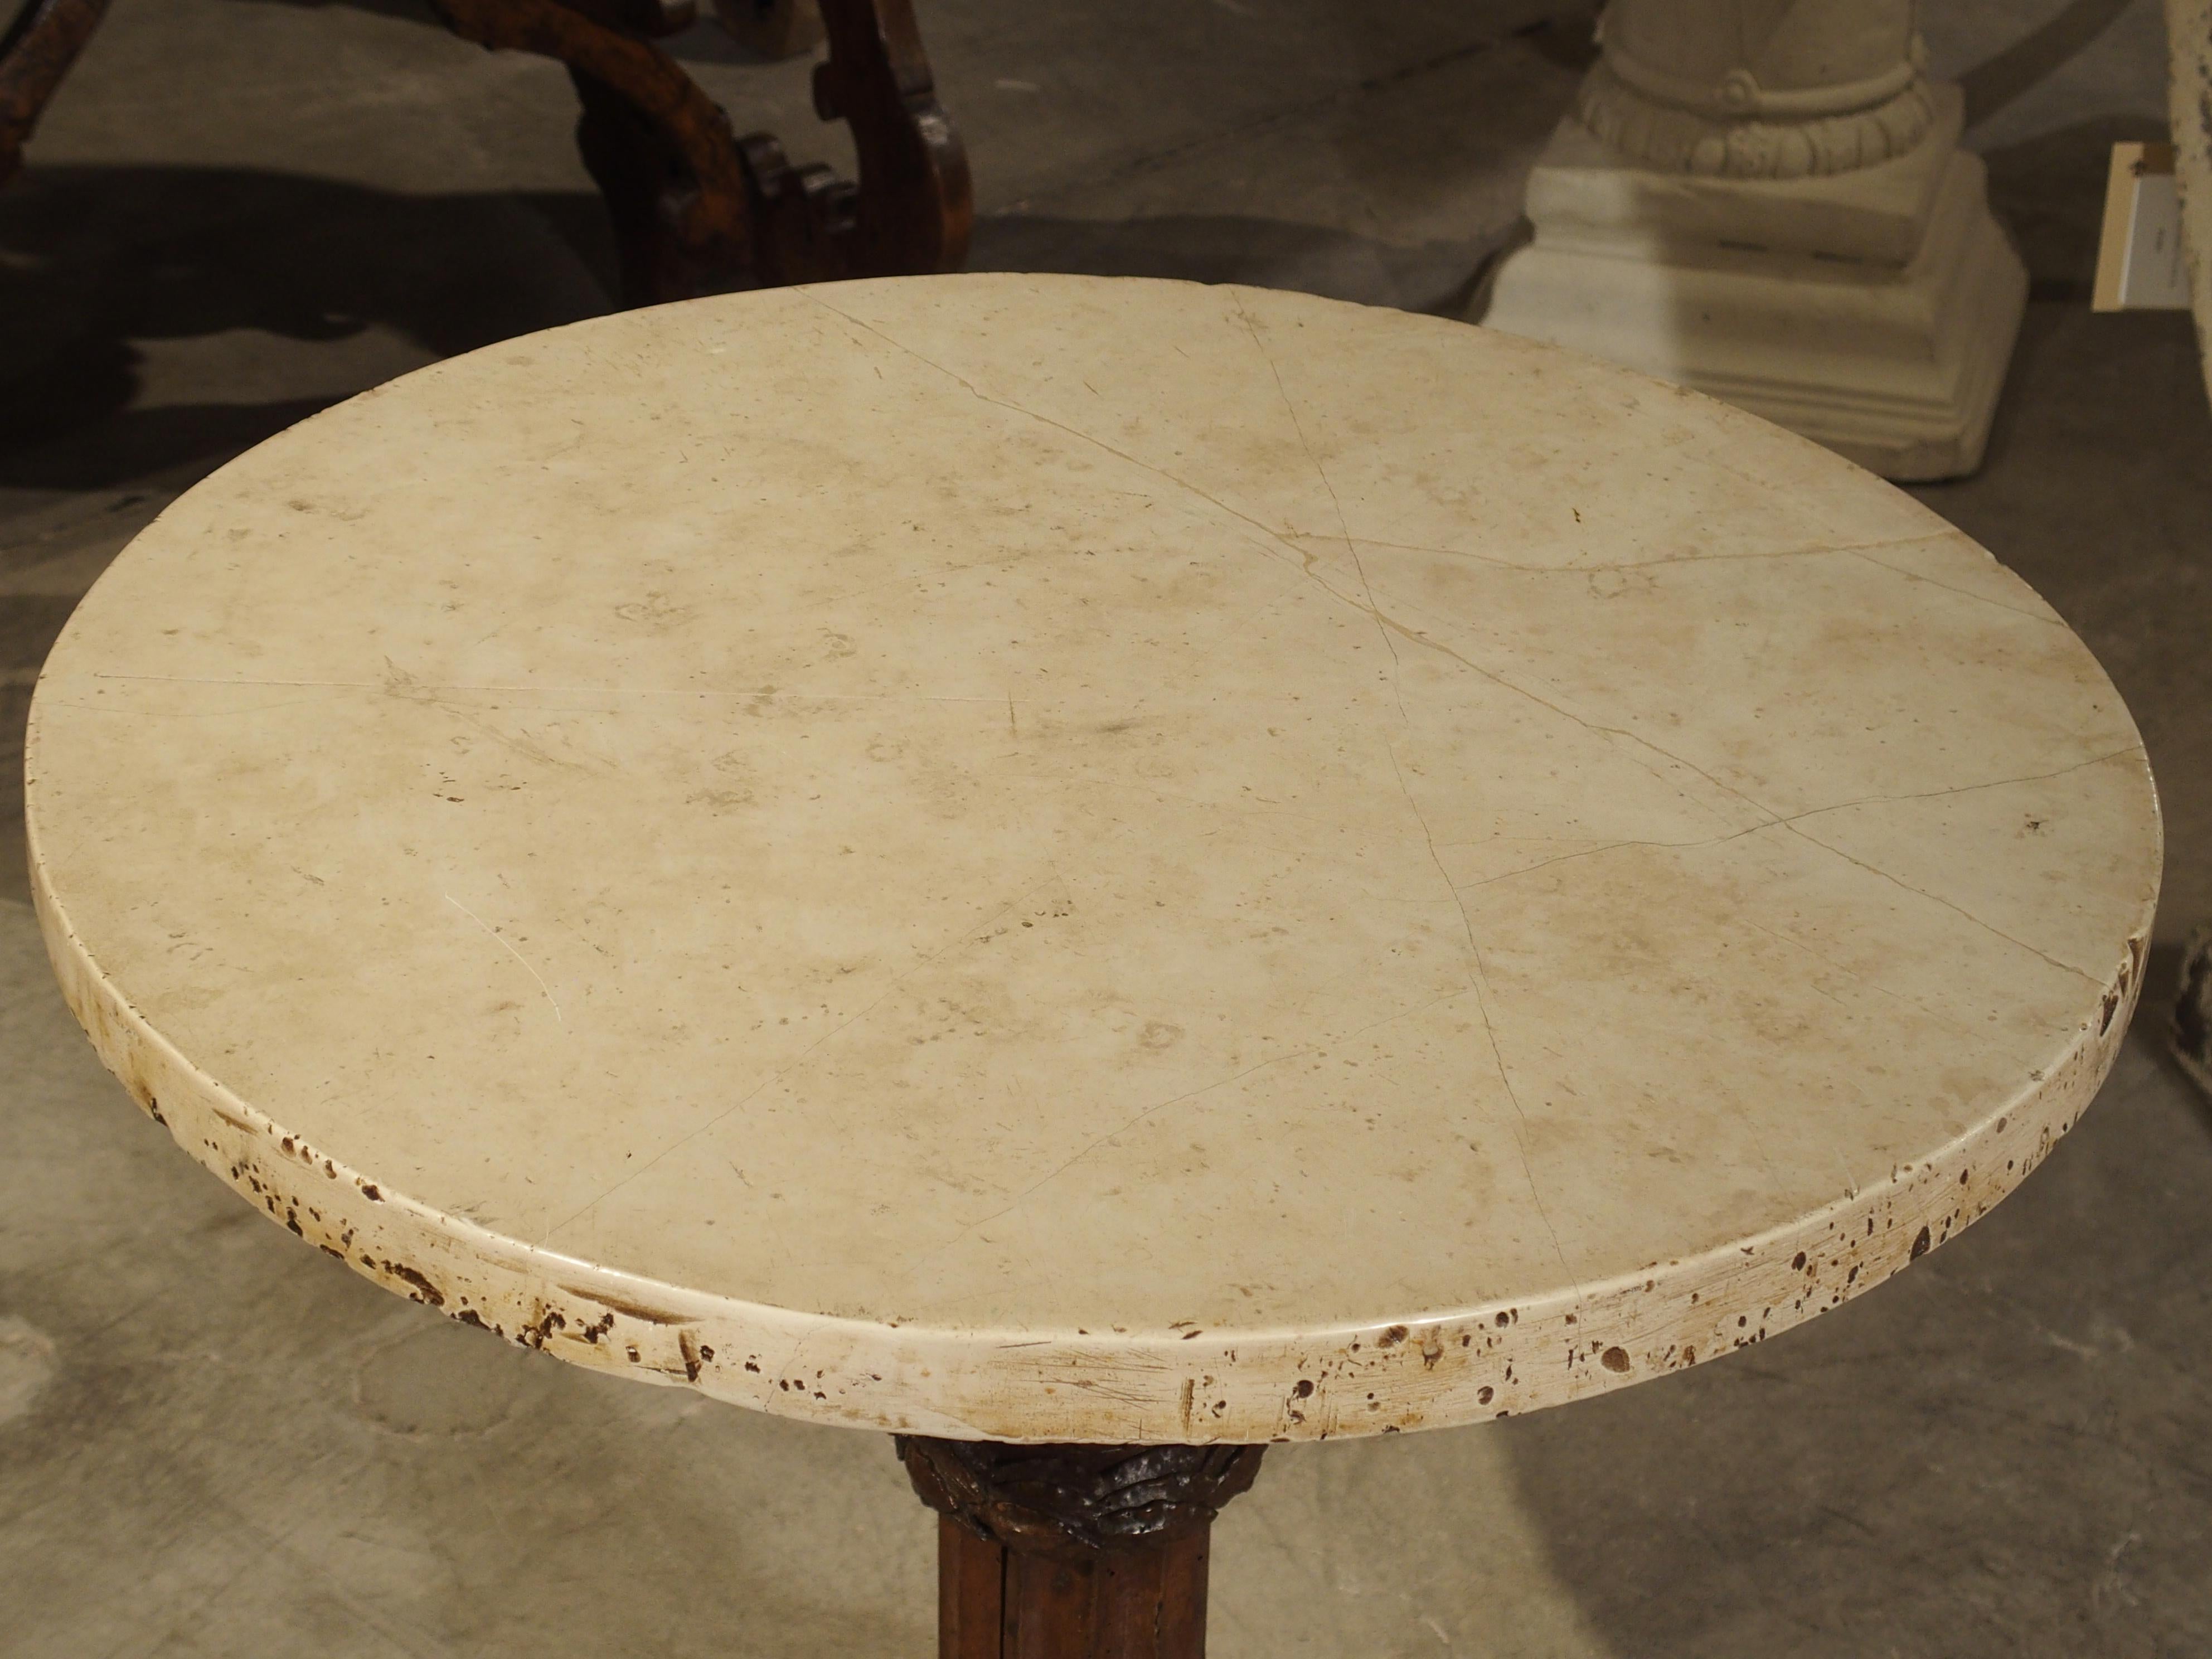 Antique Circular Genoese Carved Wood and Marble Table, circa 1820 For Sale 5